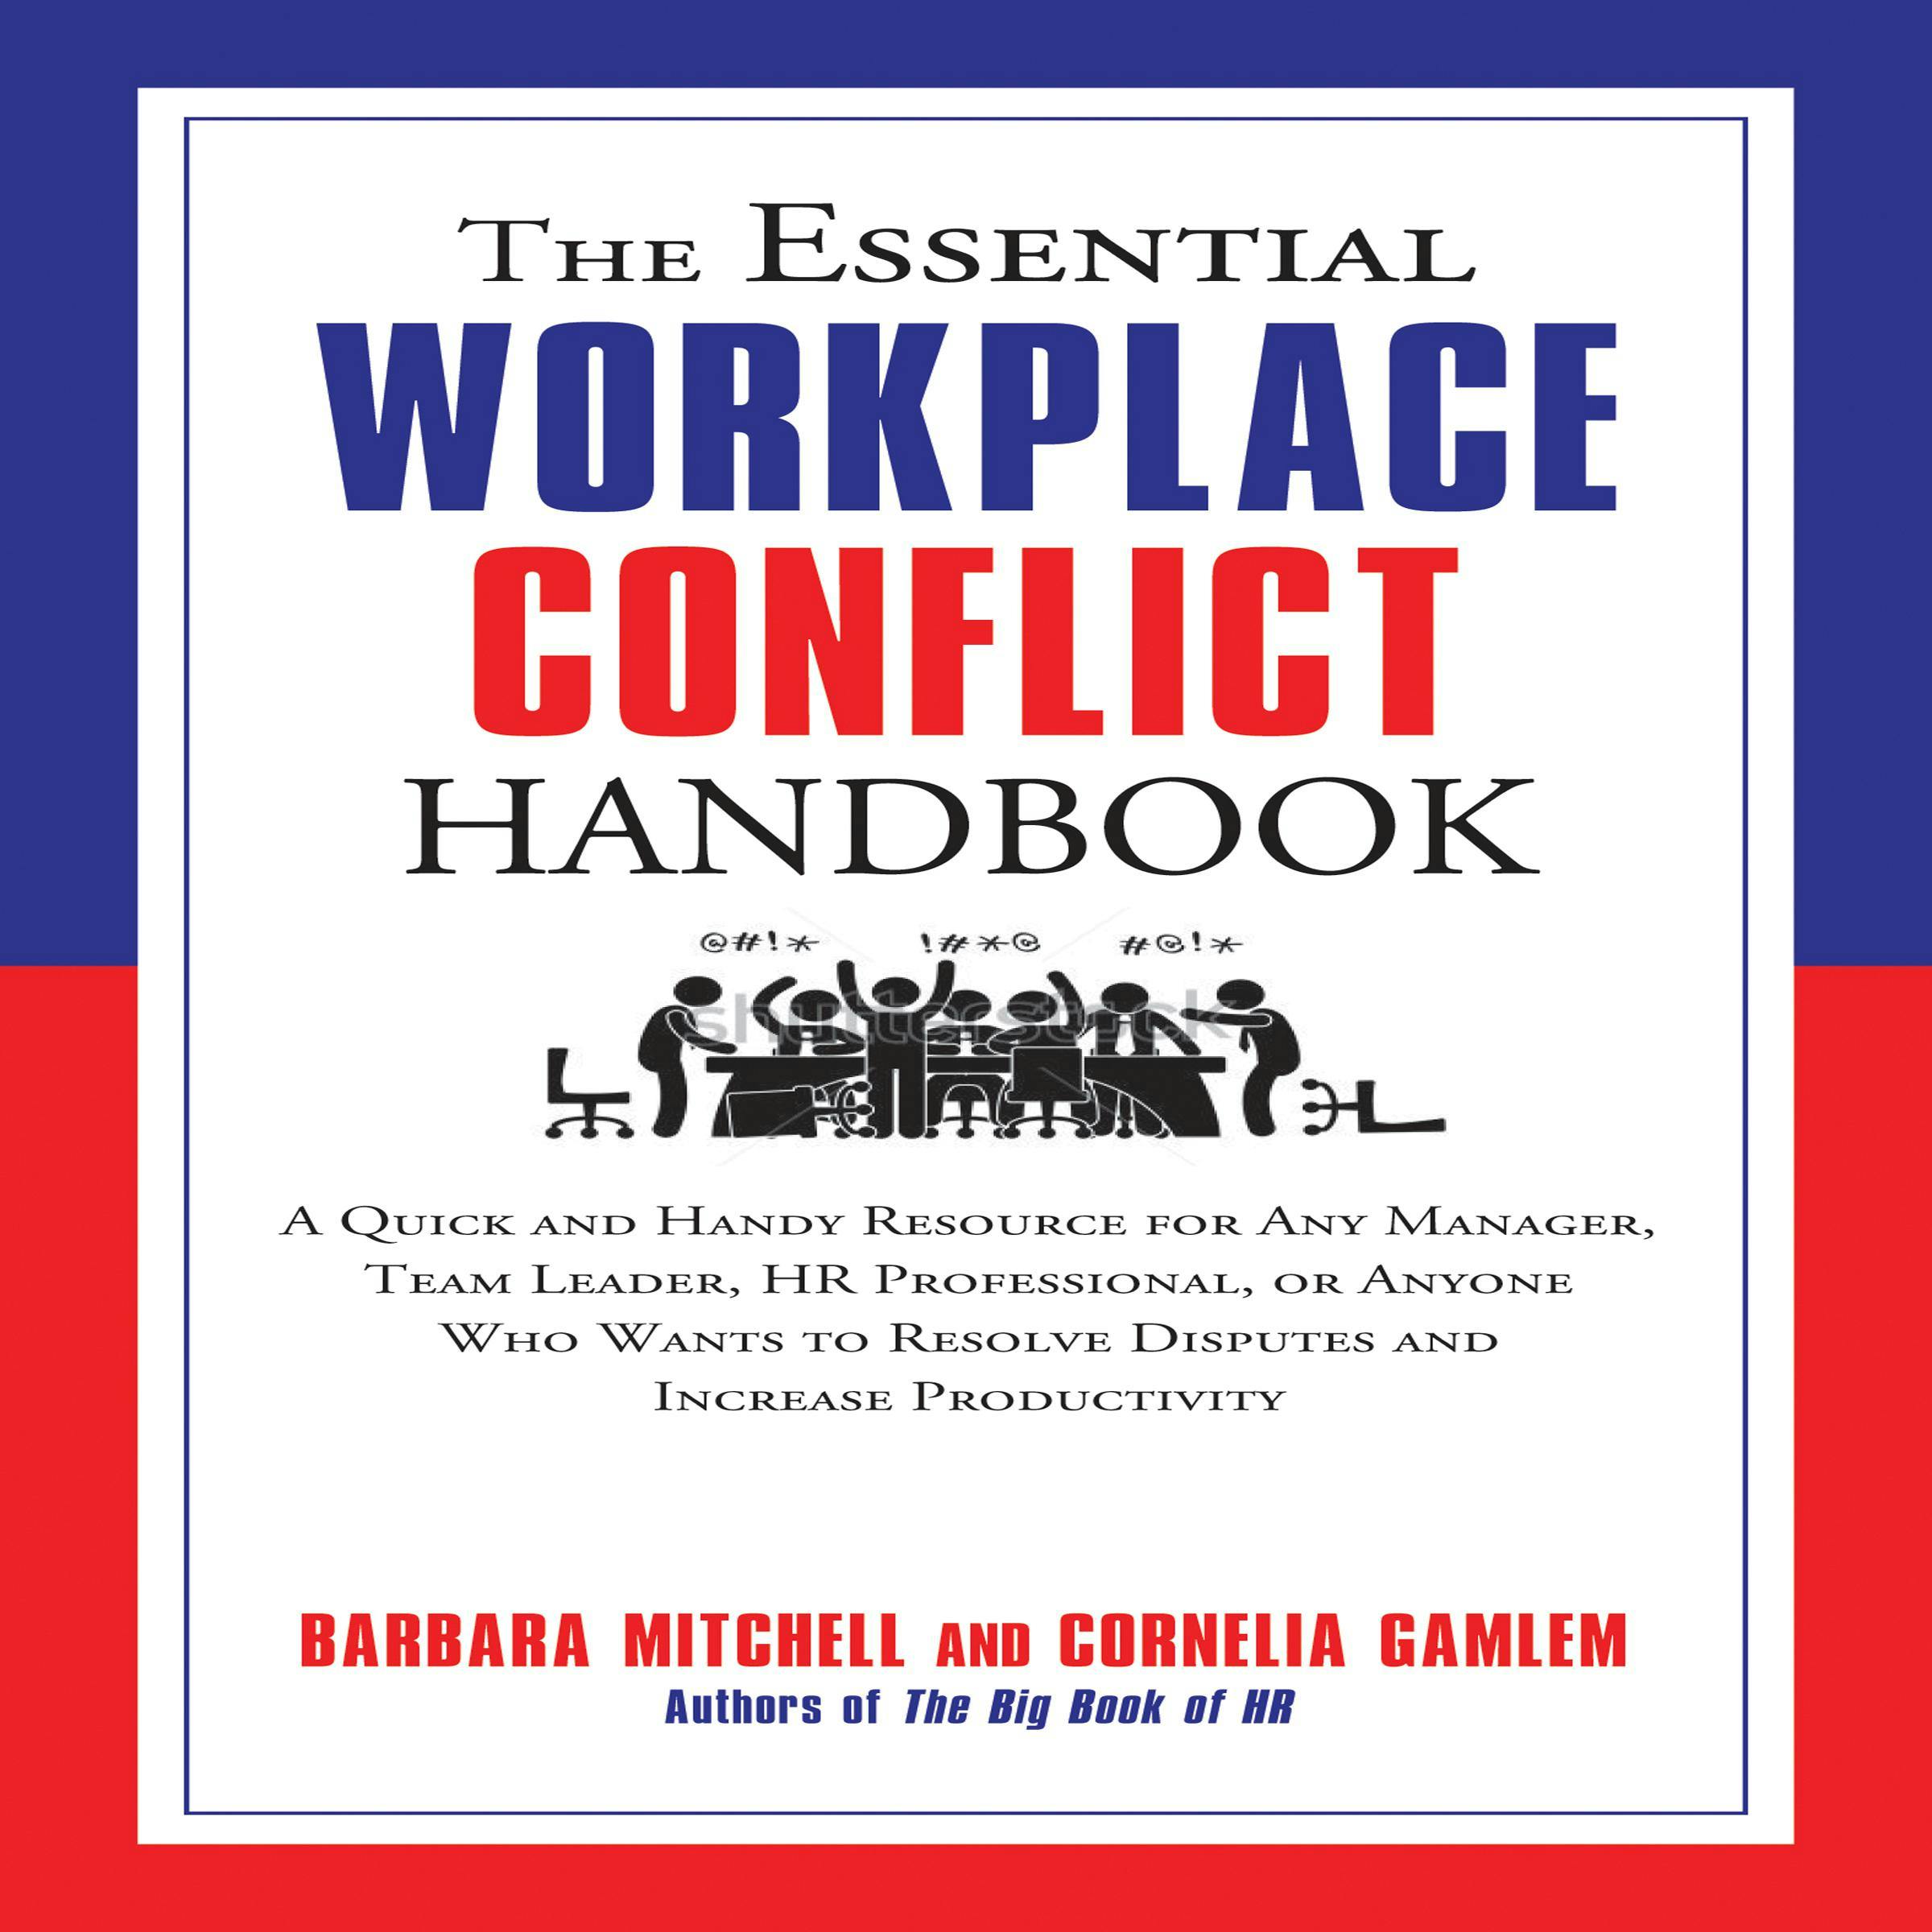 The Essential Workplace Conflict Handbook: A Quick and Handy Resource for Any Manager, Team Leader, Hr Professional, or Anyone Who Wants to Resolve Disputes and Increase Productivity - Cornelia Gamlem, Barbara Mitchell